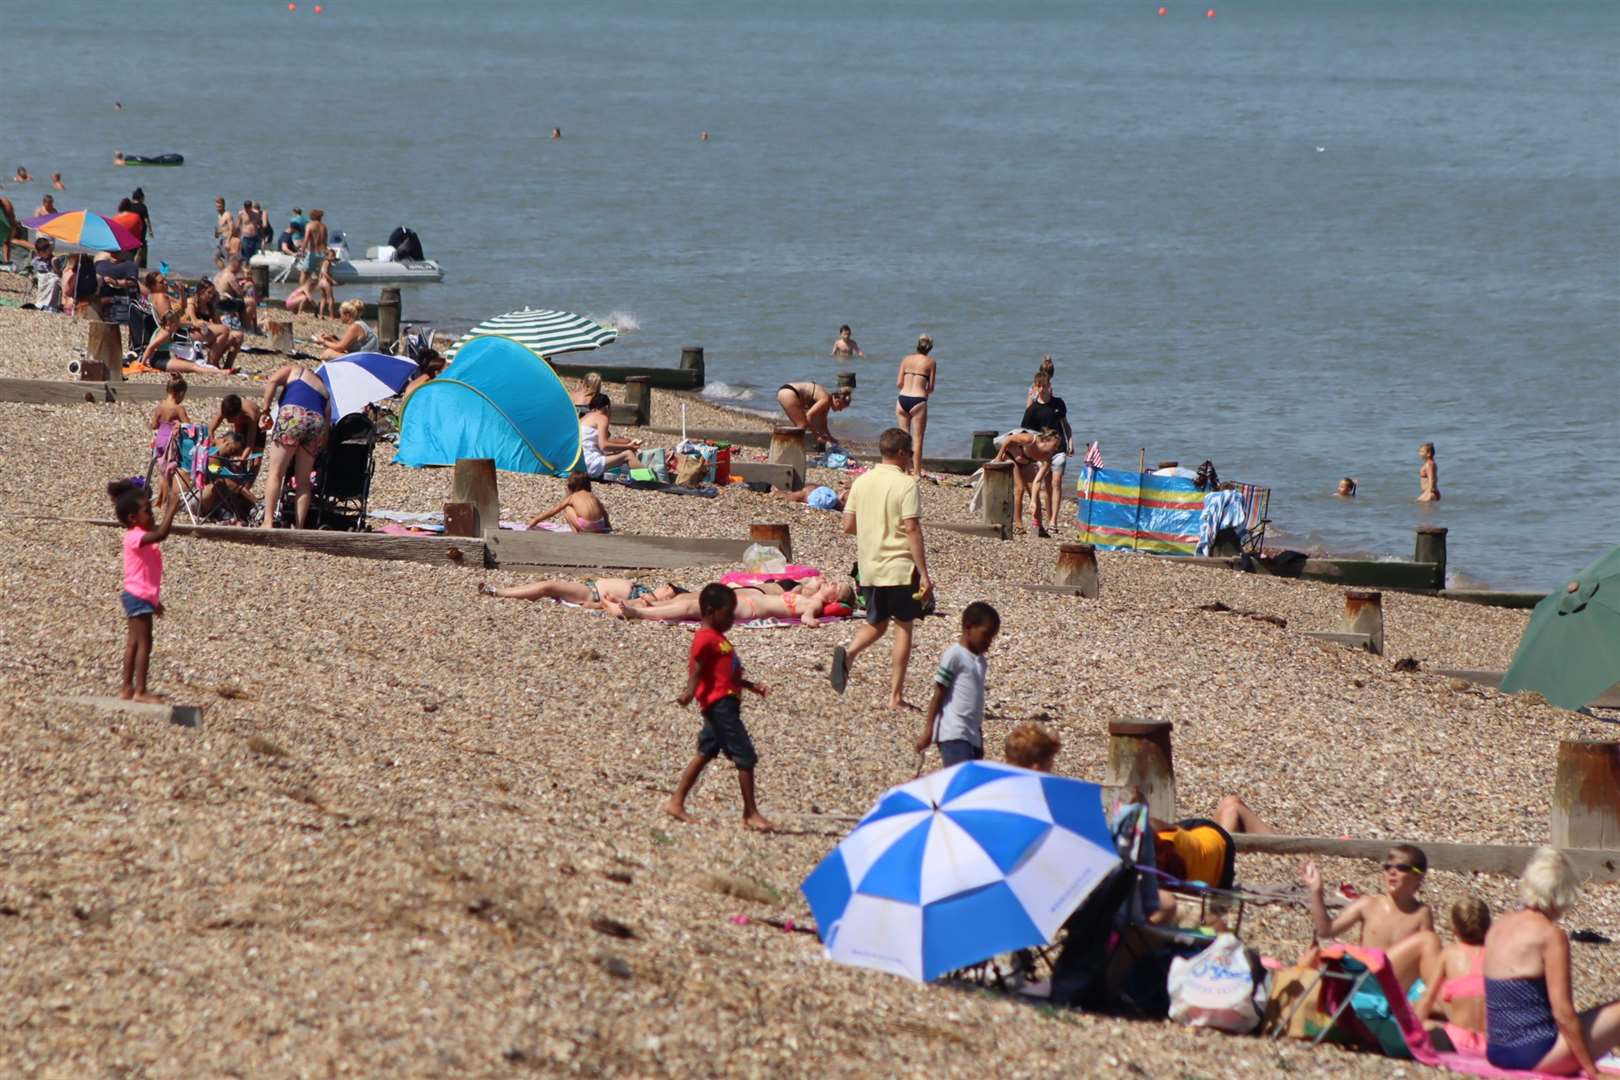 Sheppey has proved hugely popular during the hot weather